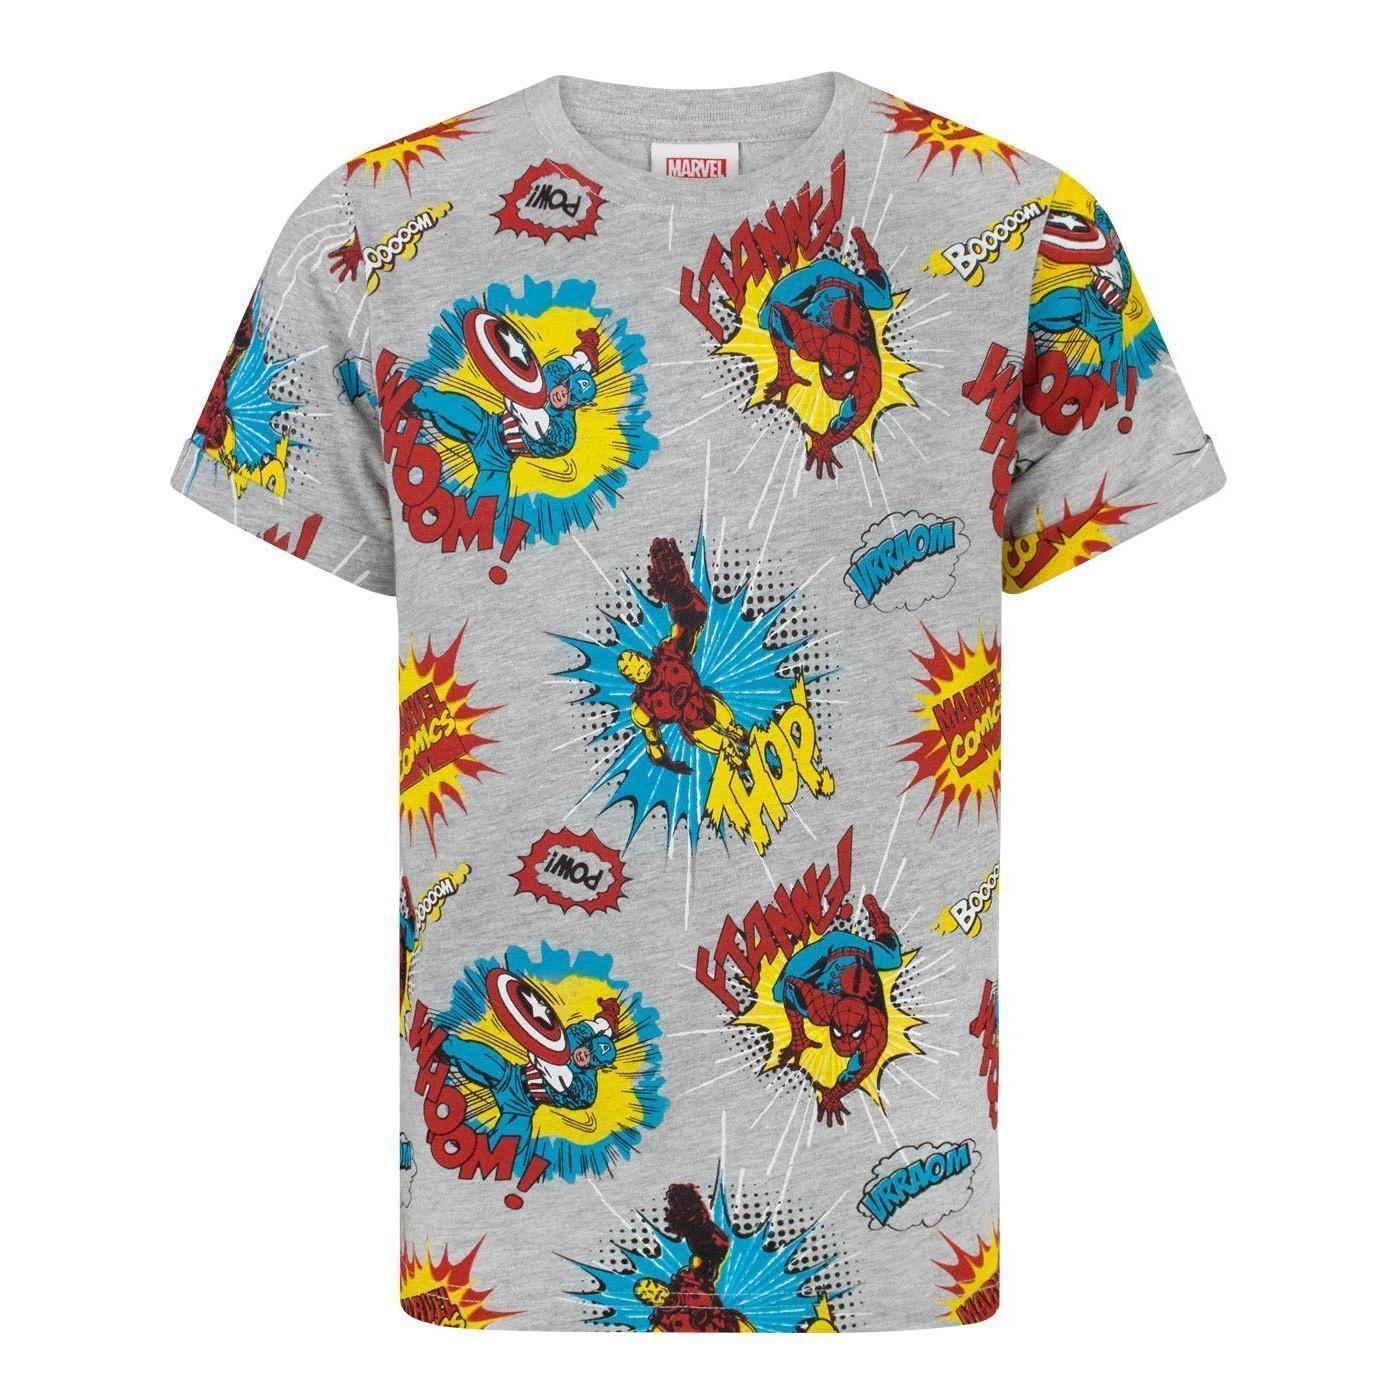 Marvel Boys All-Over Print T-Shirt (Heather Grey/Red/Yellow) (13-14 Years)